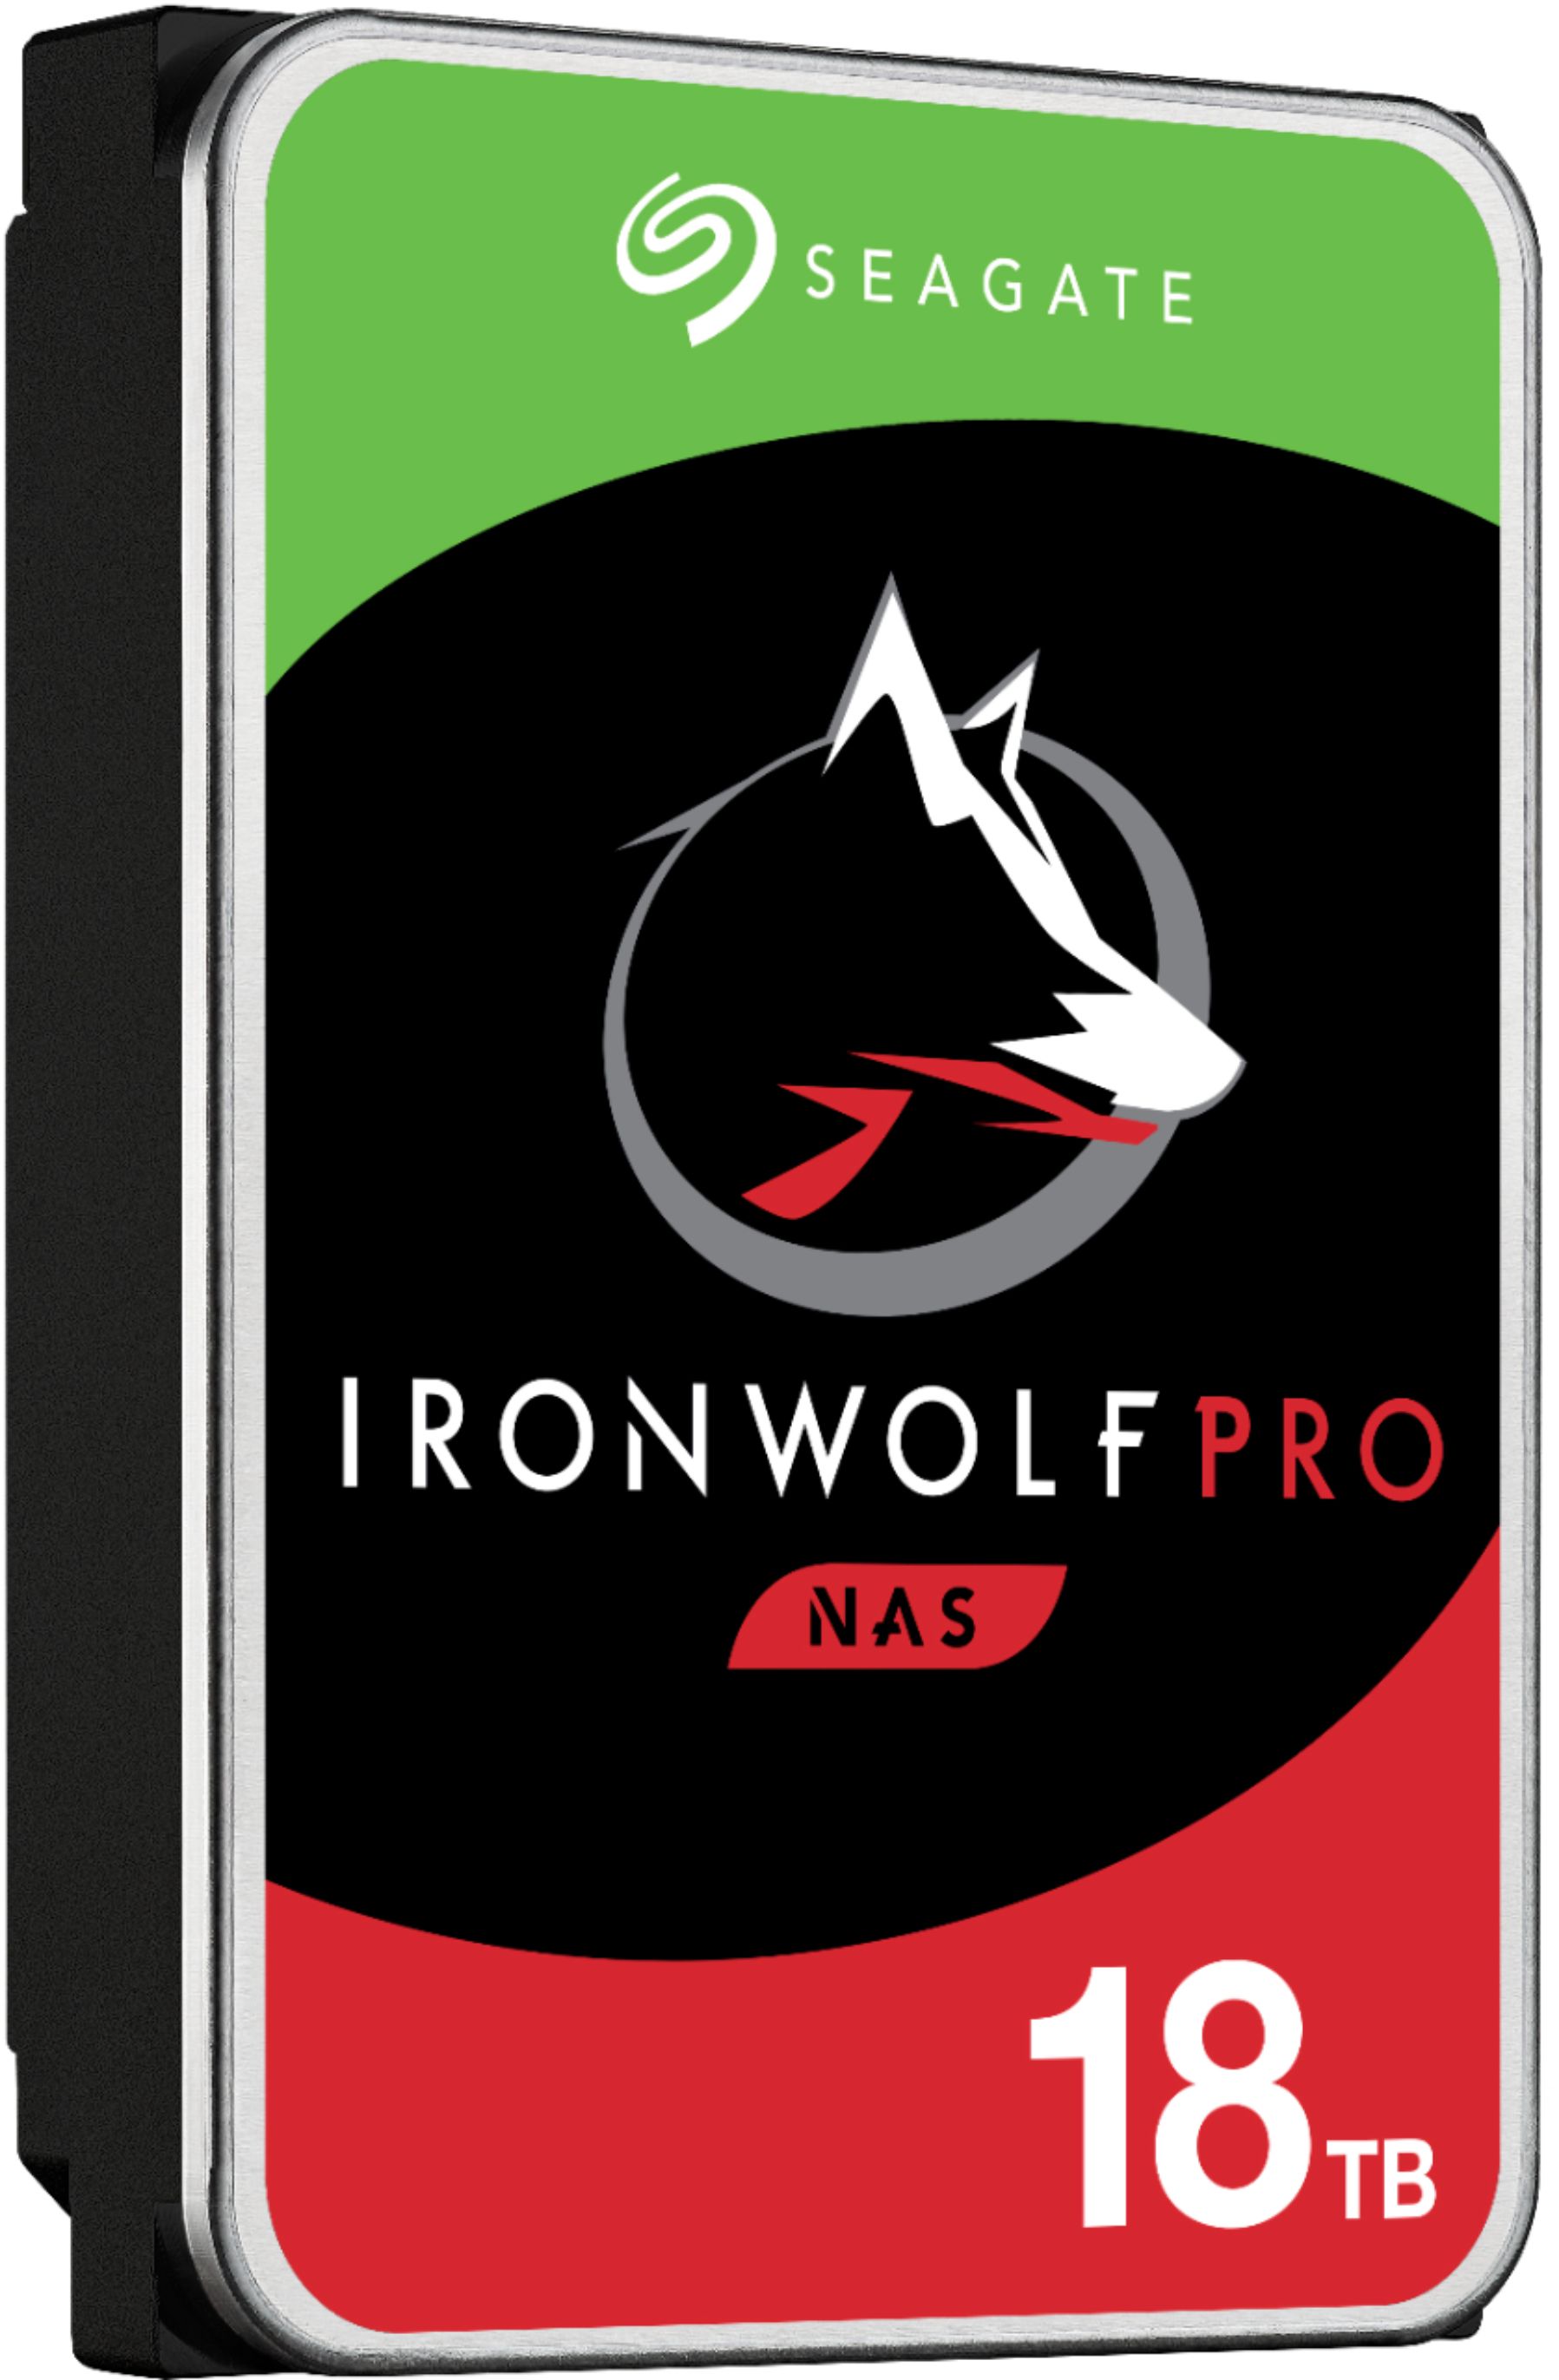 0763649150382 - SEAGATE - IRONWOLF PRO 18TB INTERNAL SATA NAS HARD DRIVE WITH RESCUE DATA RECOVERY SERVICES